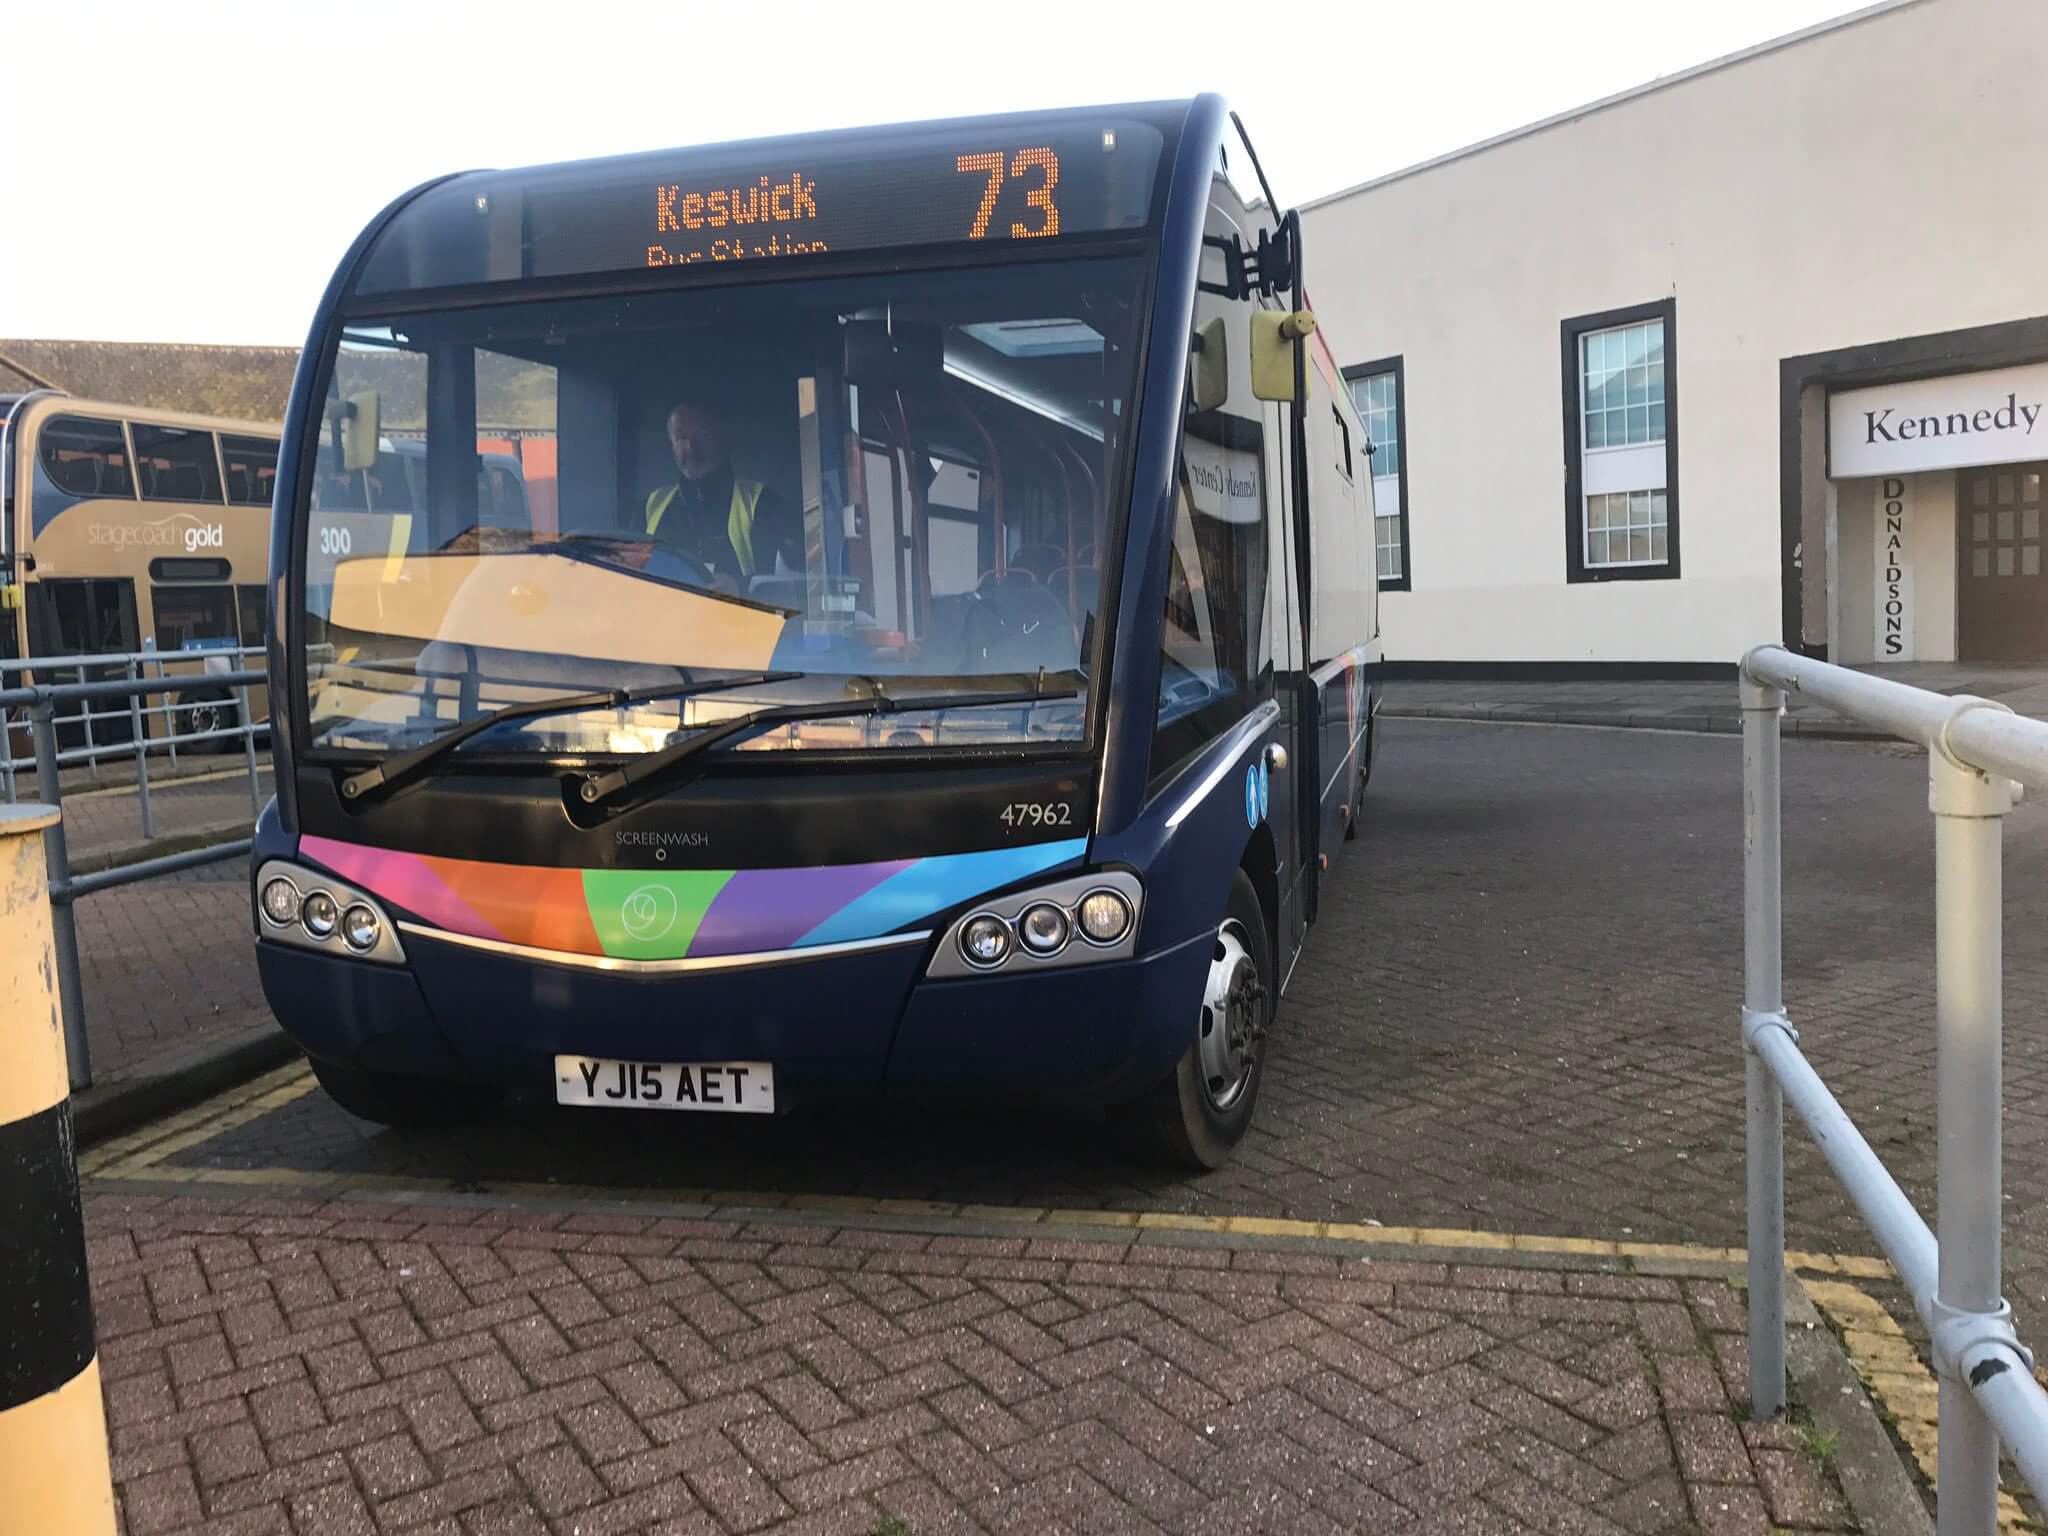 Stagecoach 73 waiting in Carlisle bus station